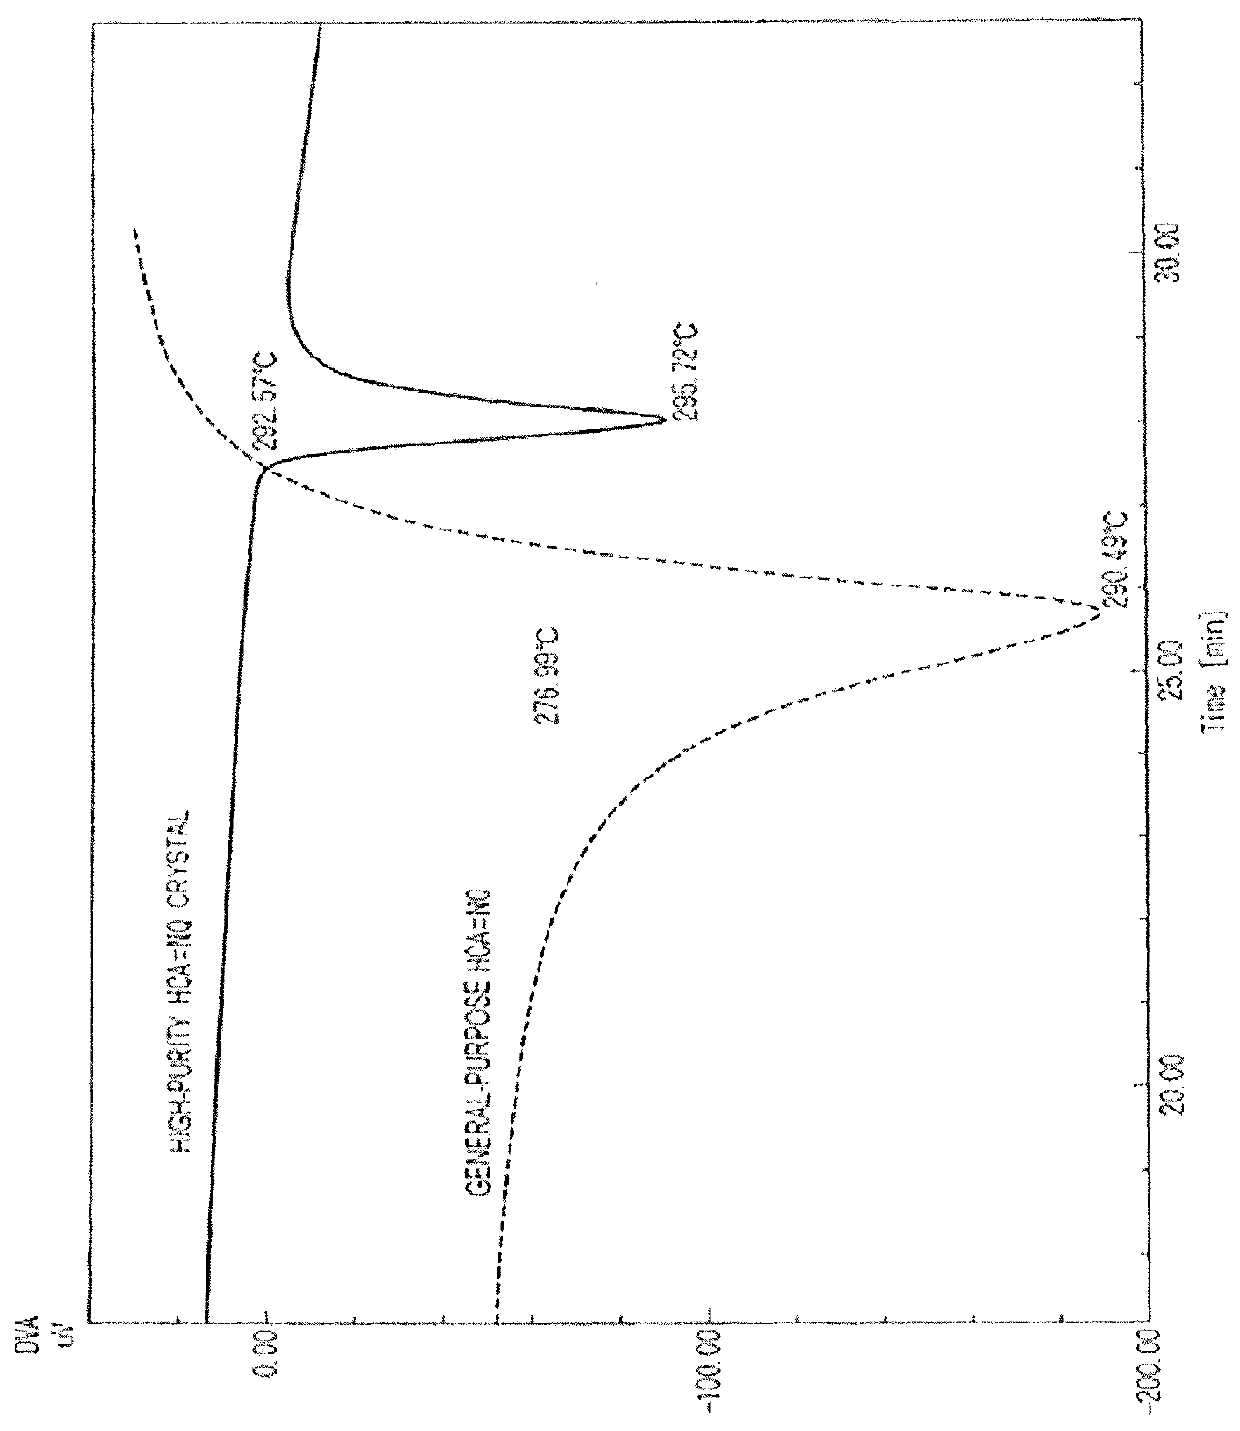 High melting point flame retardant crystal and method for manufacturing the same, epoxy resin composition containing the flame retardant, and prepreg and flame retardant laminate using the composition